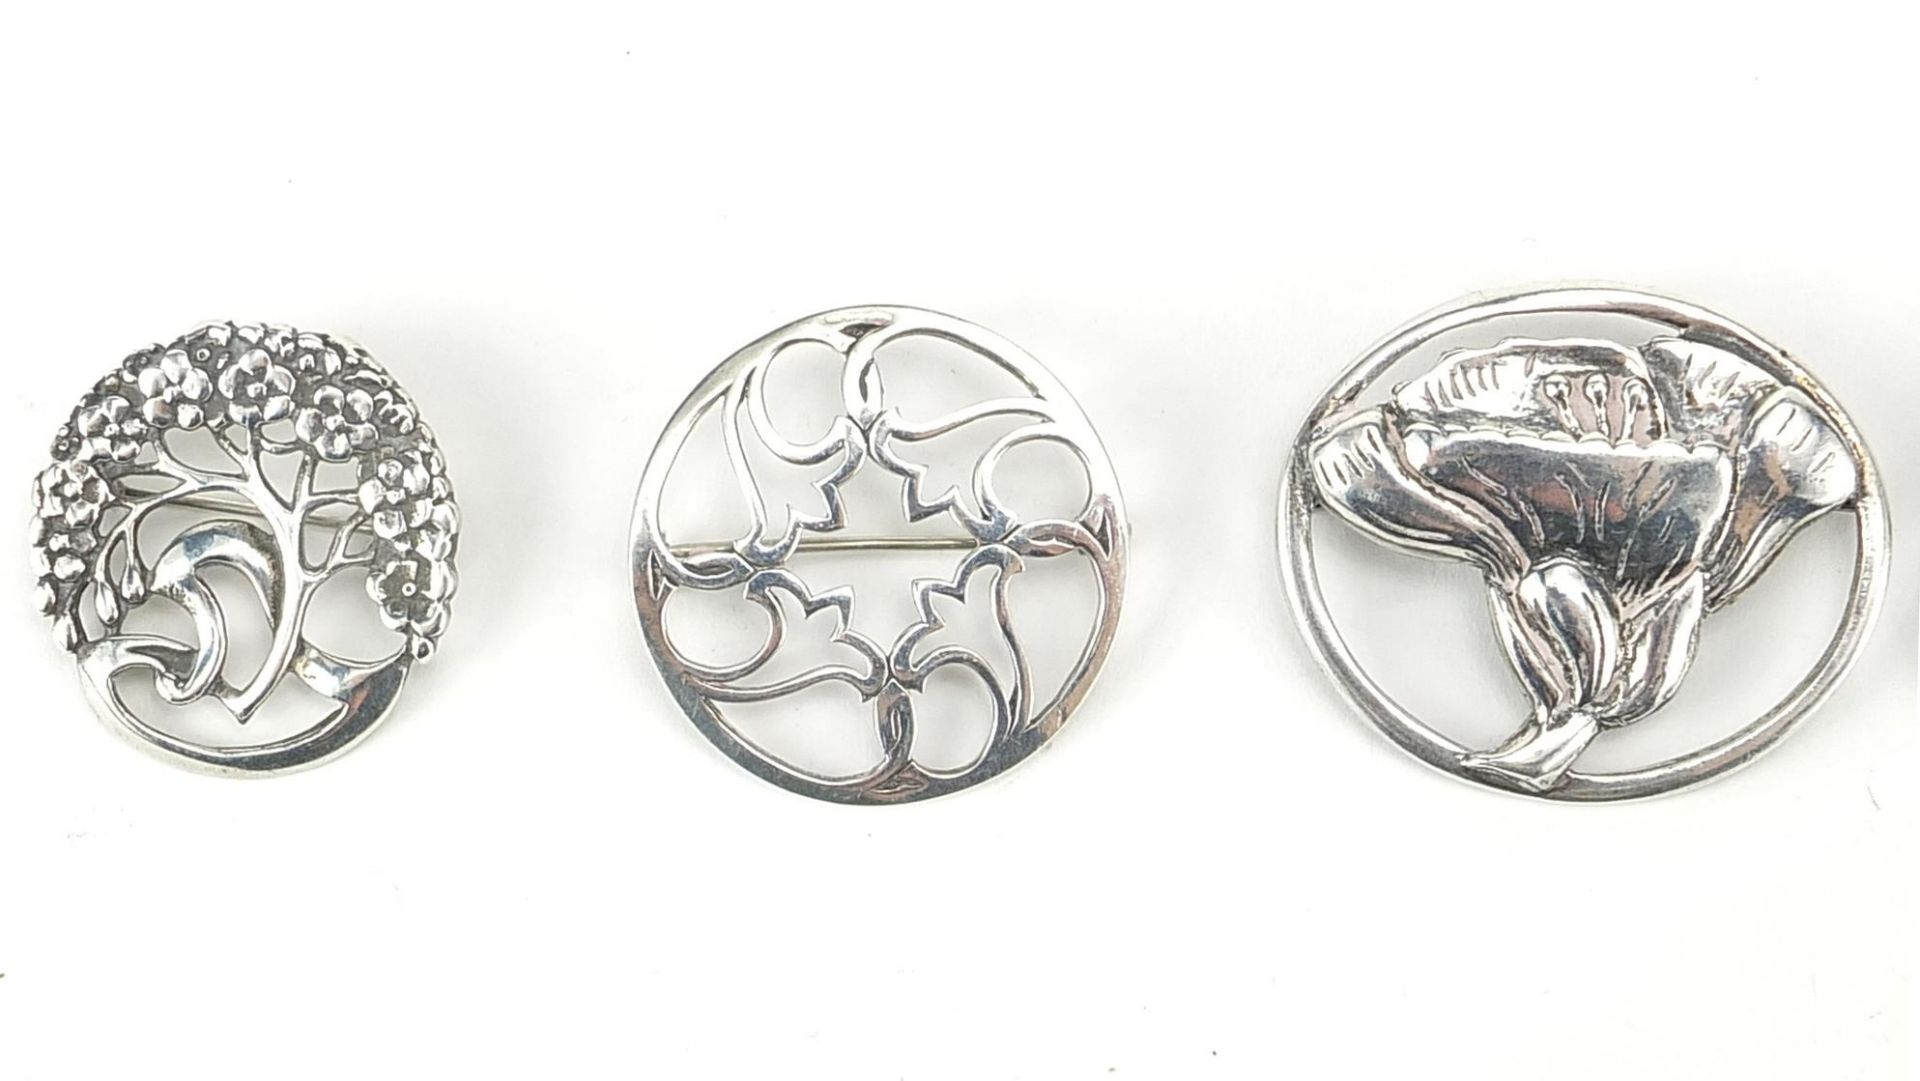 Six Art Nouveau design silver brooches, the largest 5.8cm wide, total 49.8g - Image 2 of 5